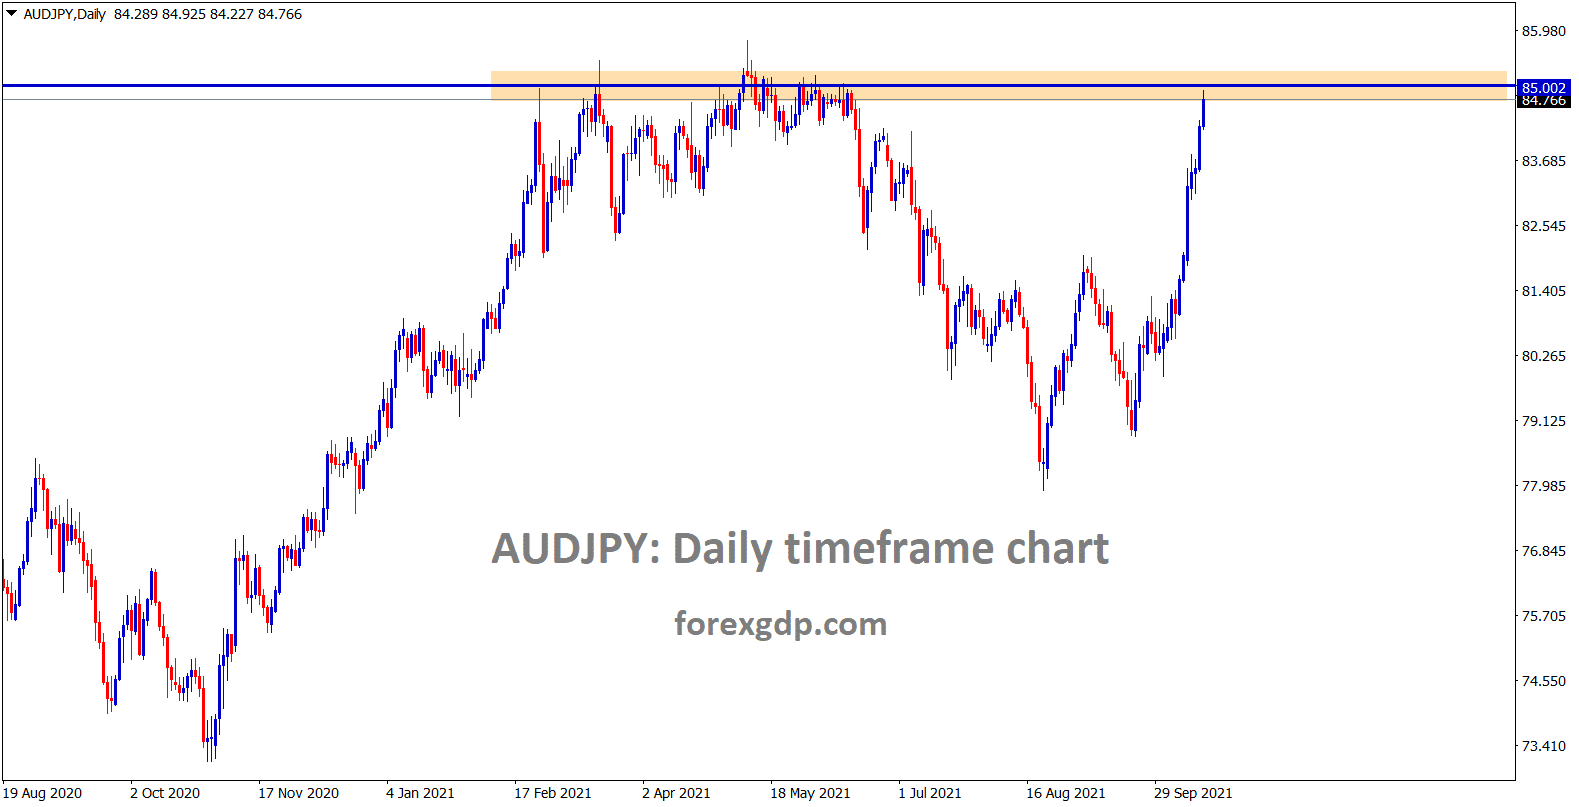 AUDJPY came back to the resistance area in the daily chart